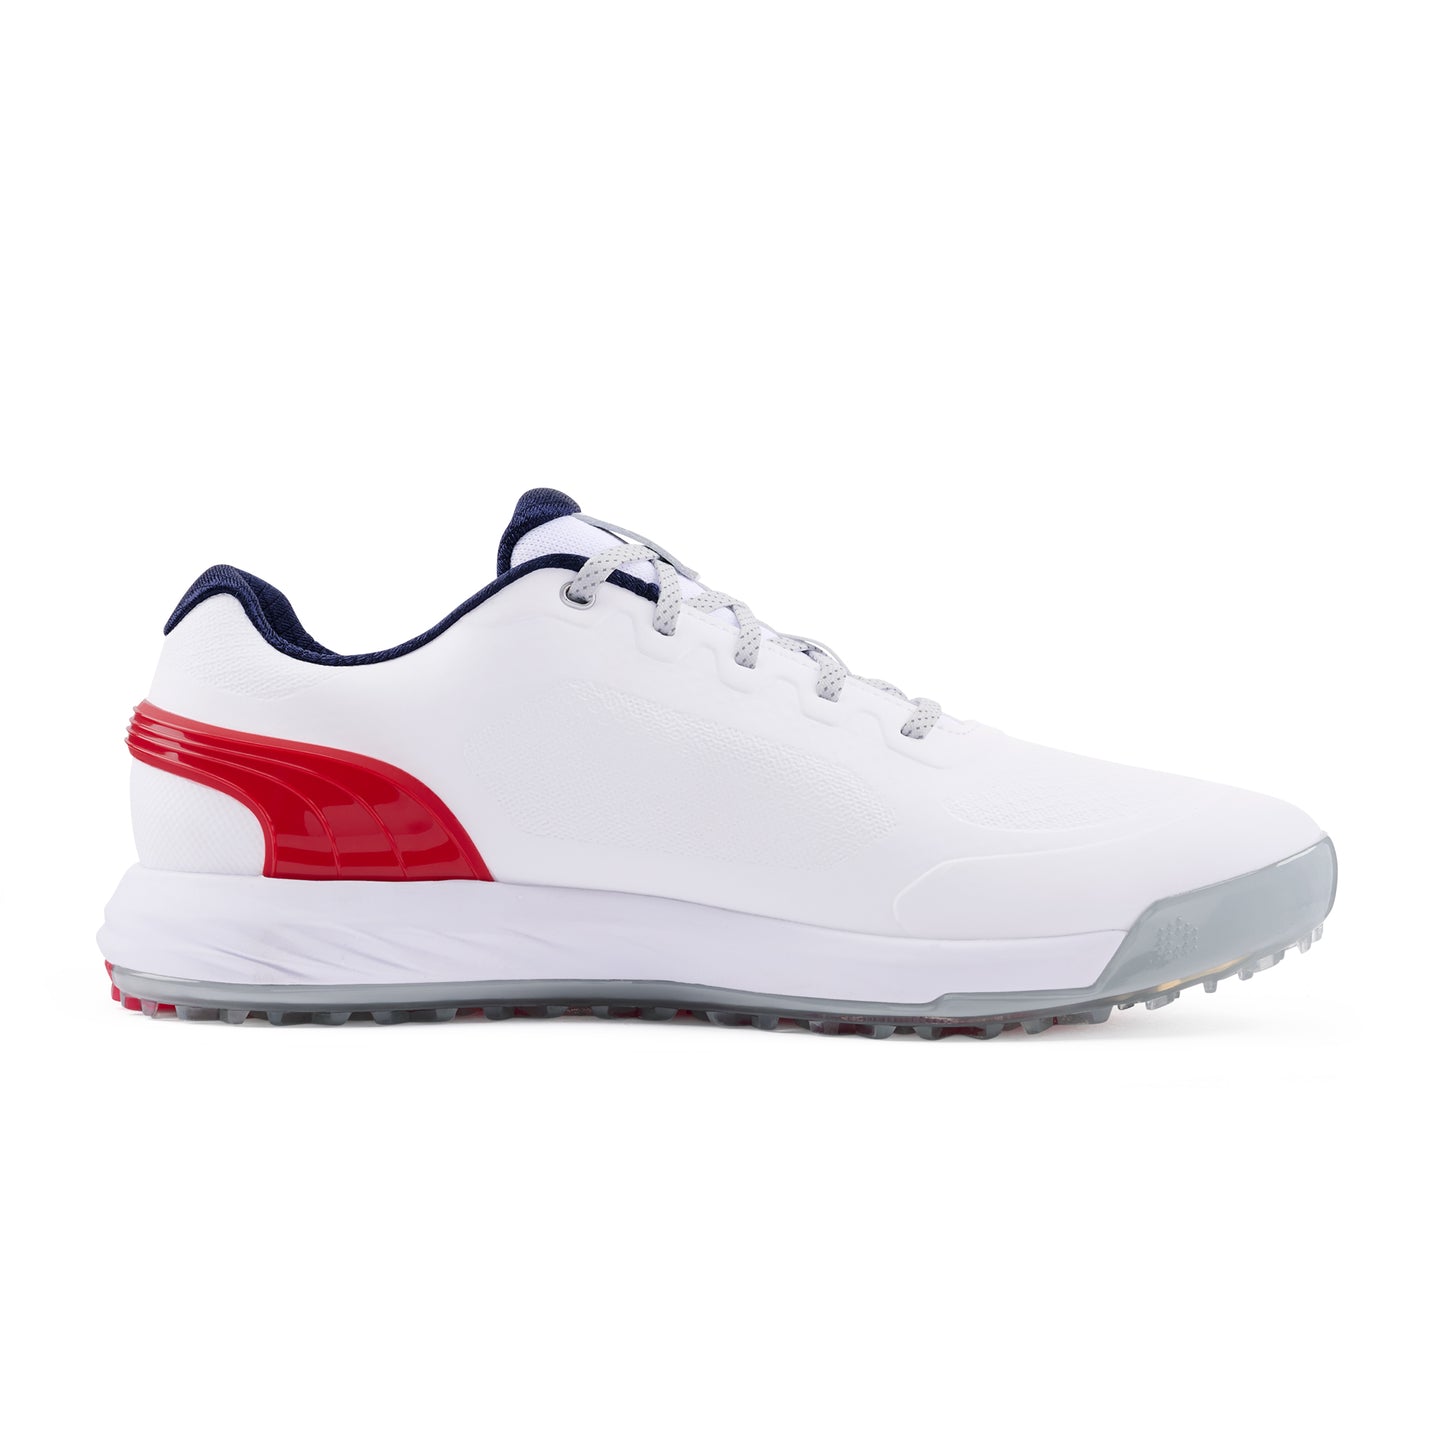 Puma White / For All Time Red / Puma Navy